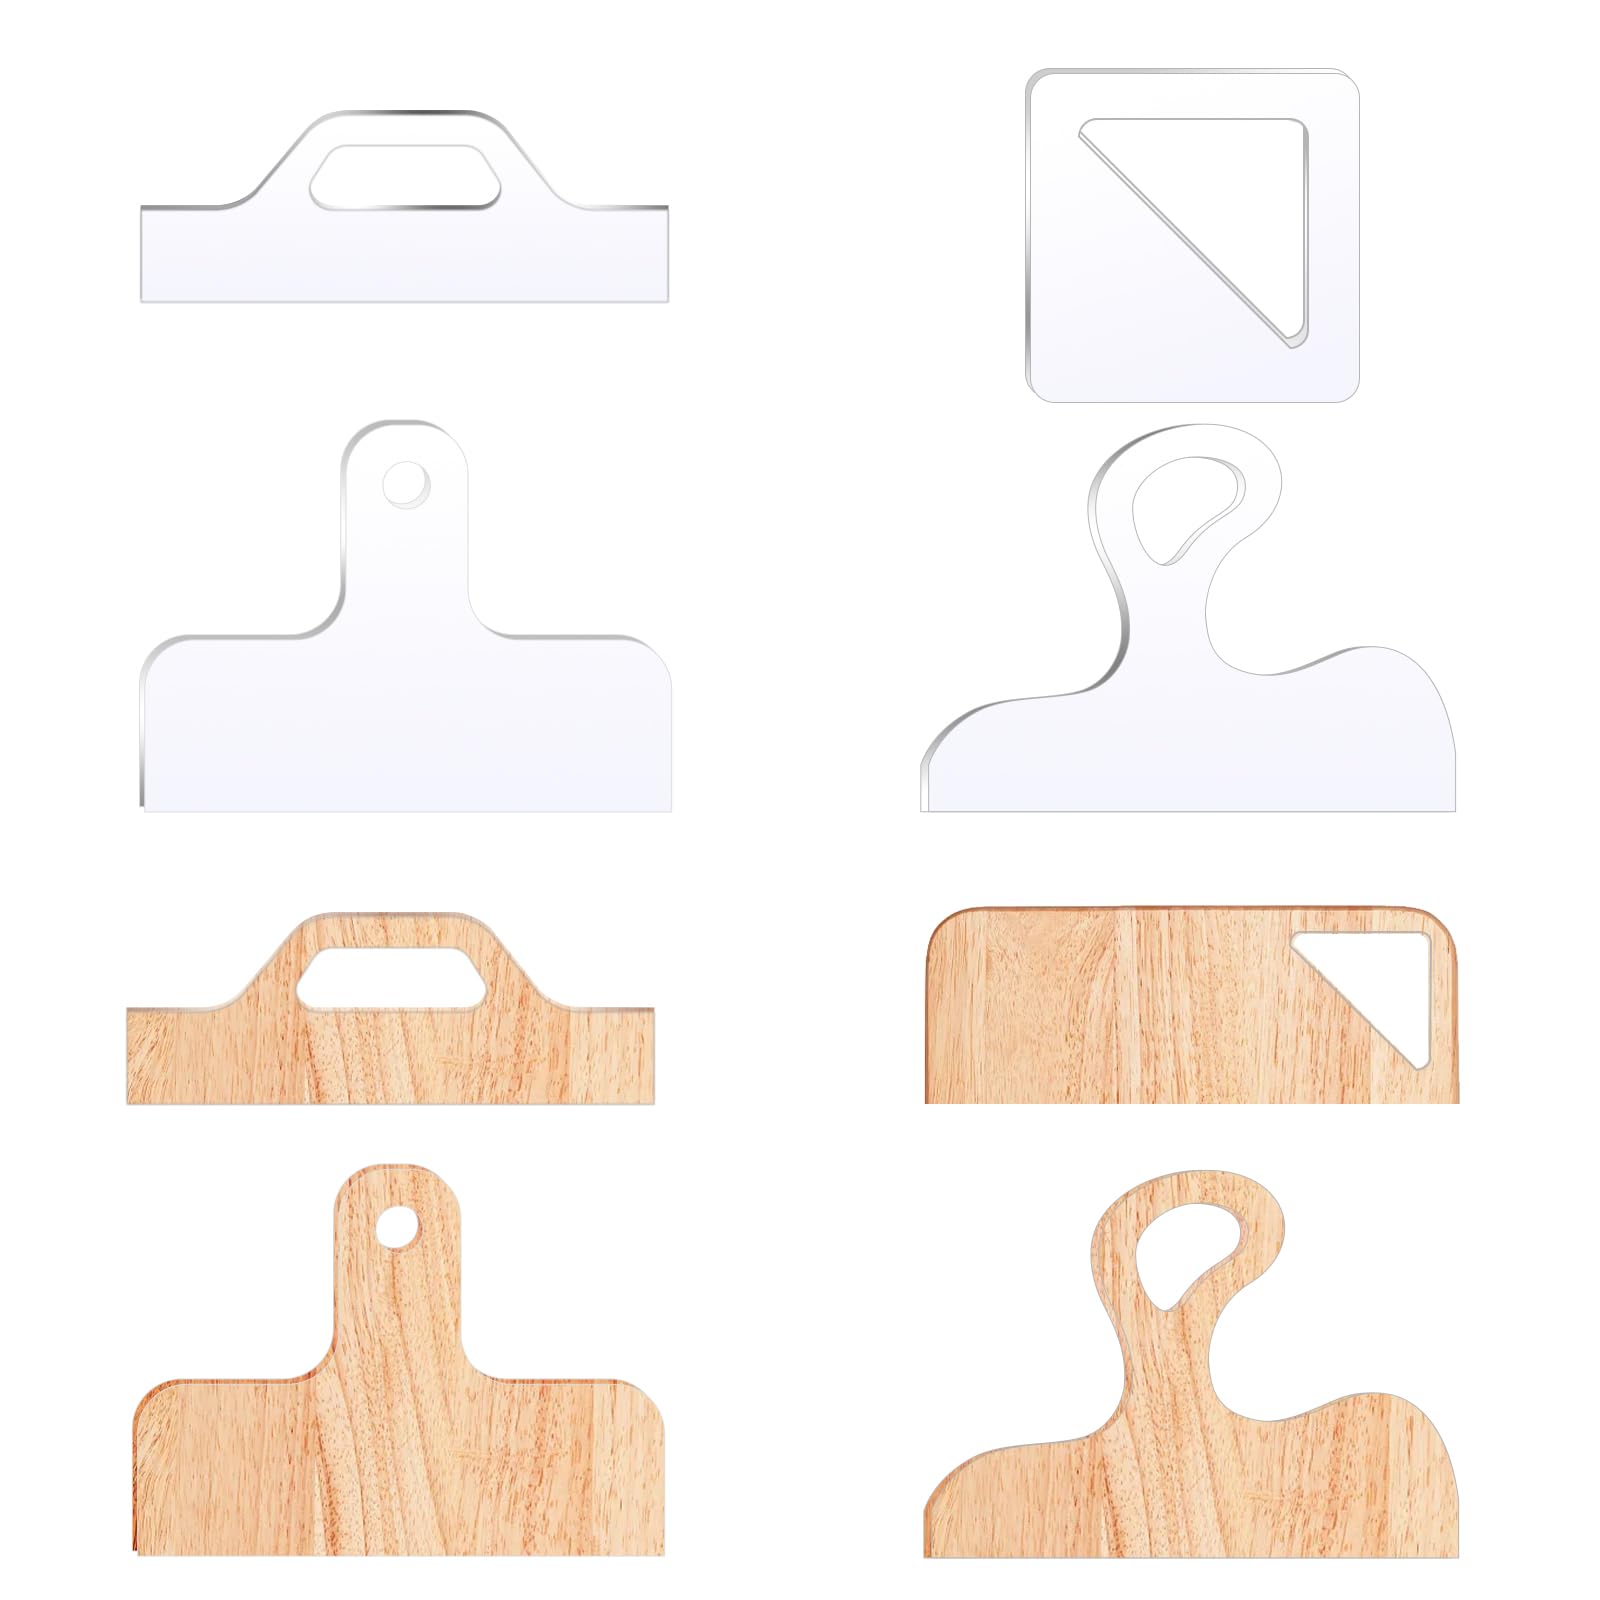 4 Pcs Router Templates Charcuterie Board Template Clear Cutting Board Router Template Acrylic Charcuterie Board Handle Template Large Angled Curvy Tracing Stencils Guide Tools for Kitchen Woodworking